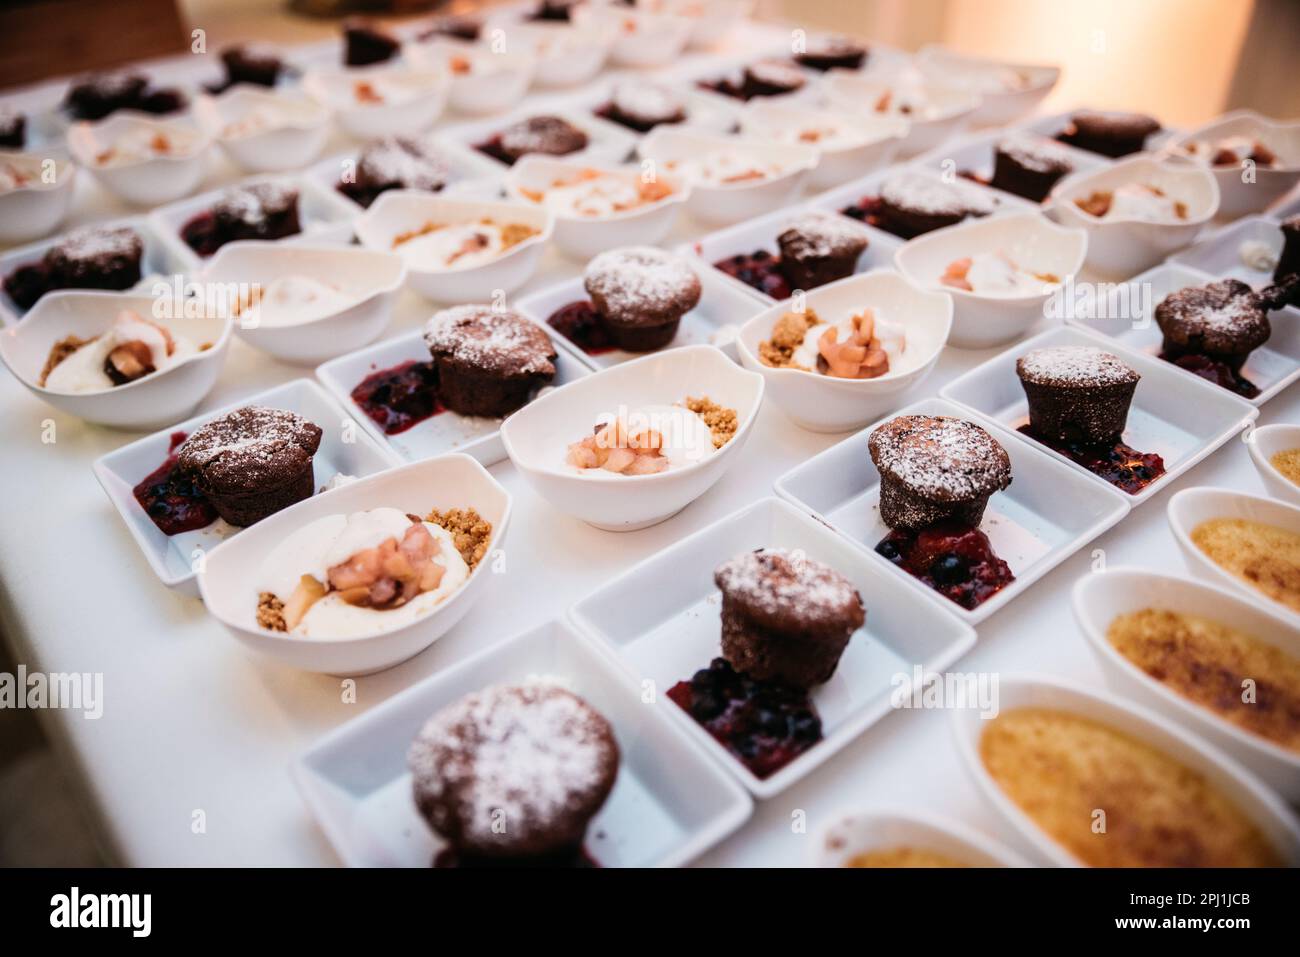 An array of delicious desserts are presented on a white table in shallow white bowls Stock Photo